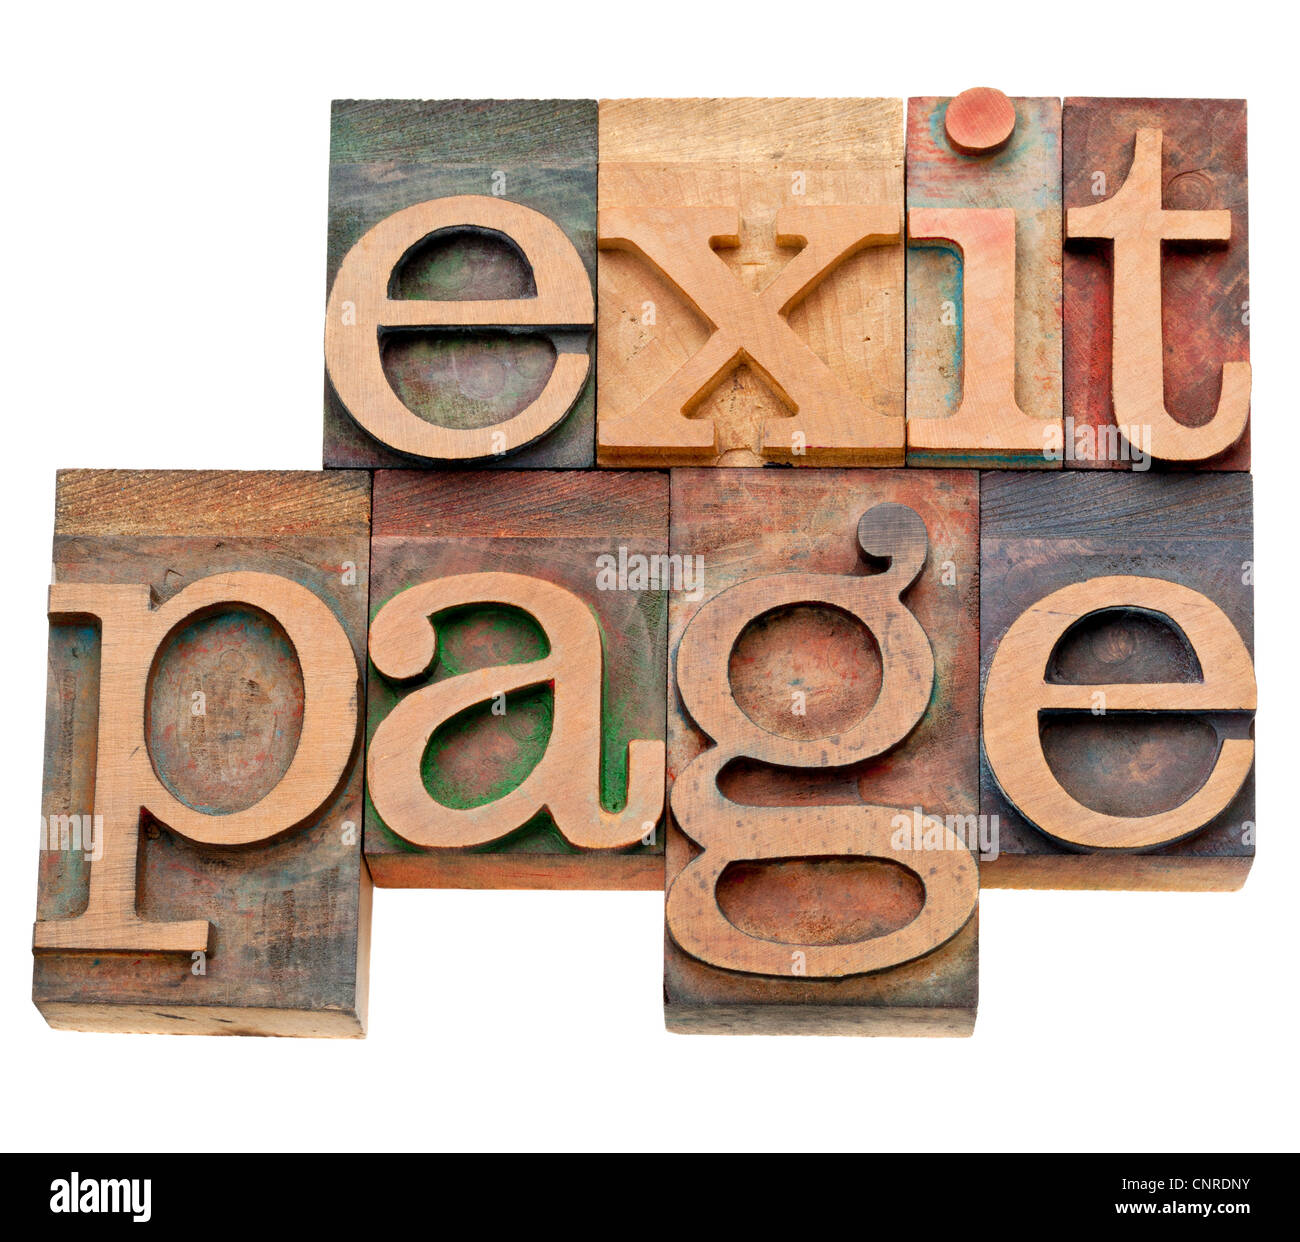 exit page - internet and SEO concept - isolated words in vintage letterpress wood type Stock Photo